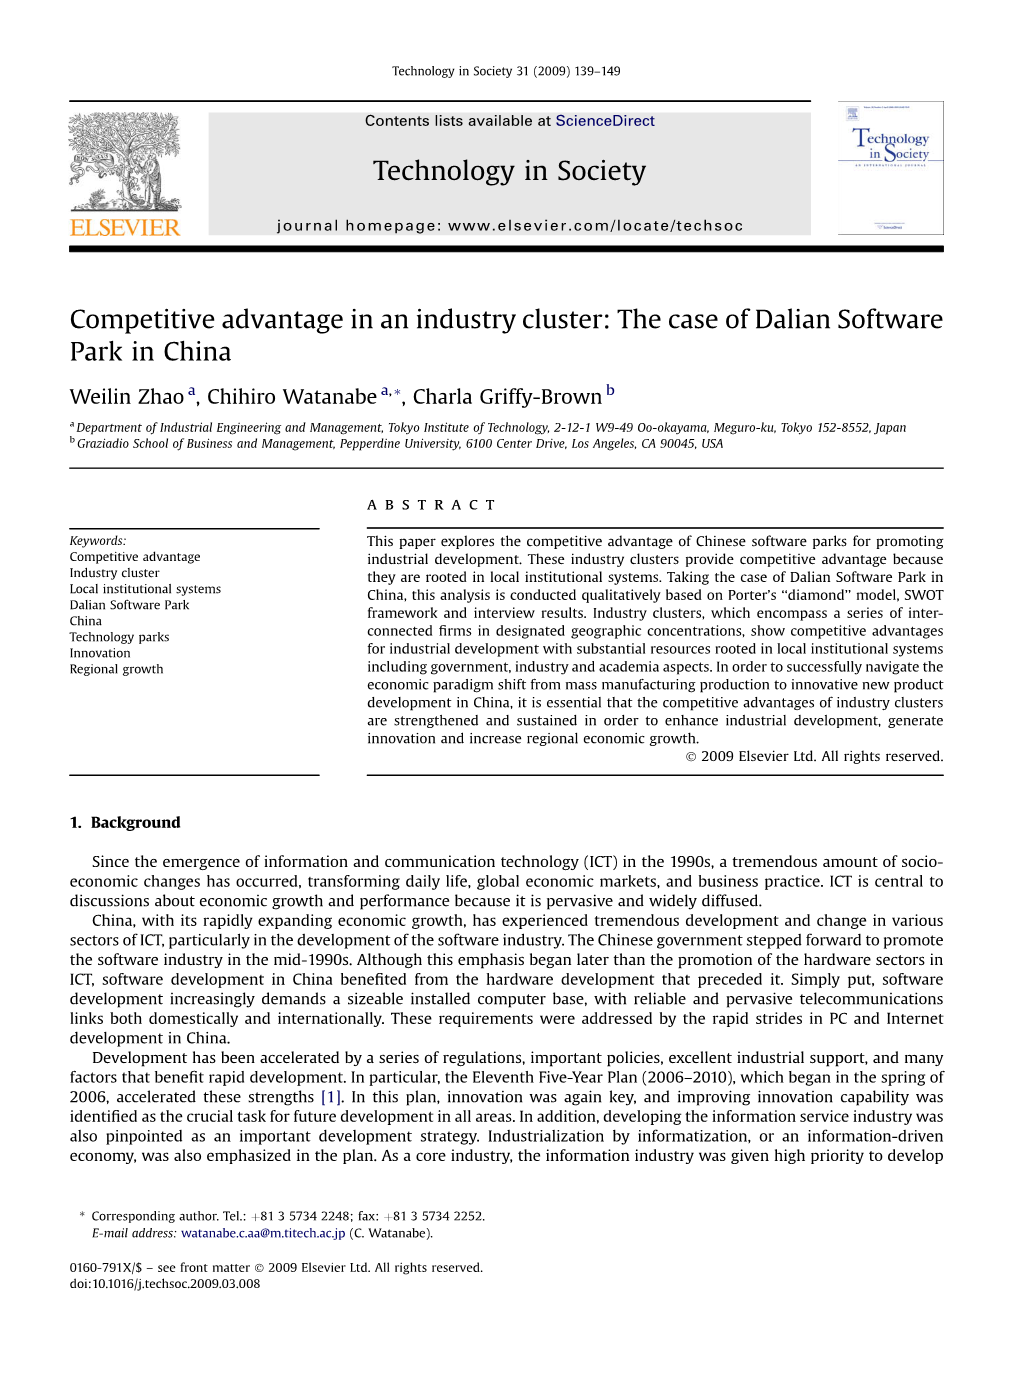 Competitive Advantage in an Industry Cluster: the Case of Dalian Software Park in China